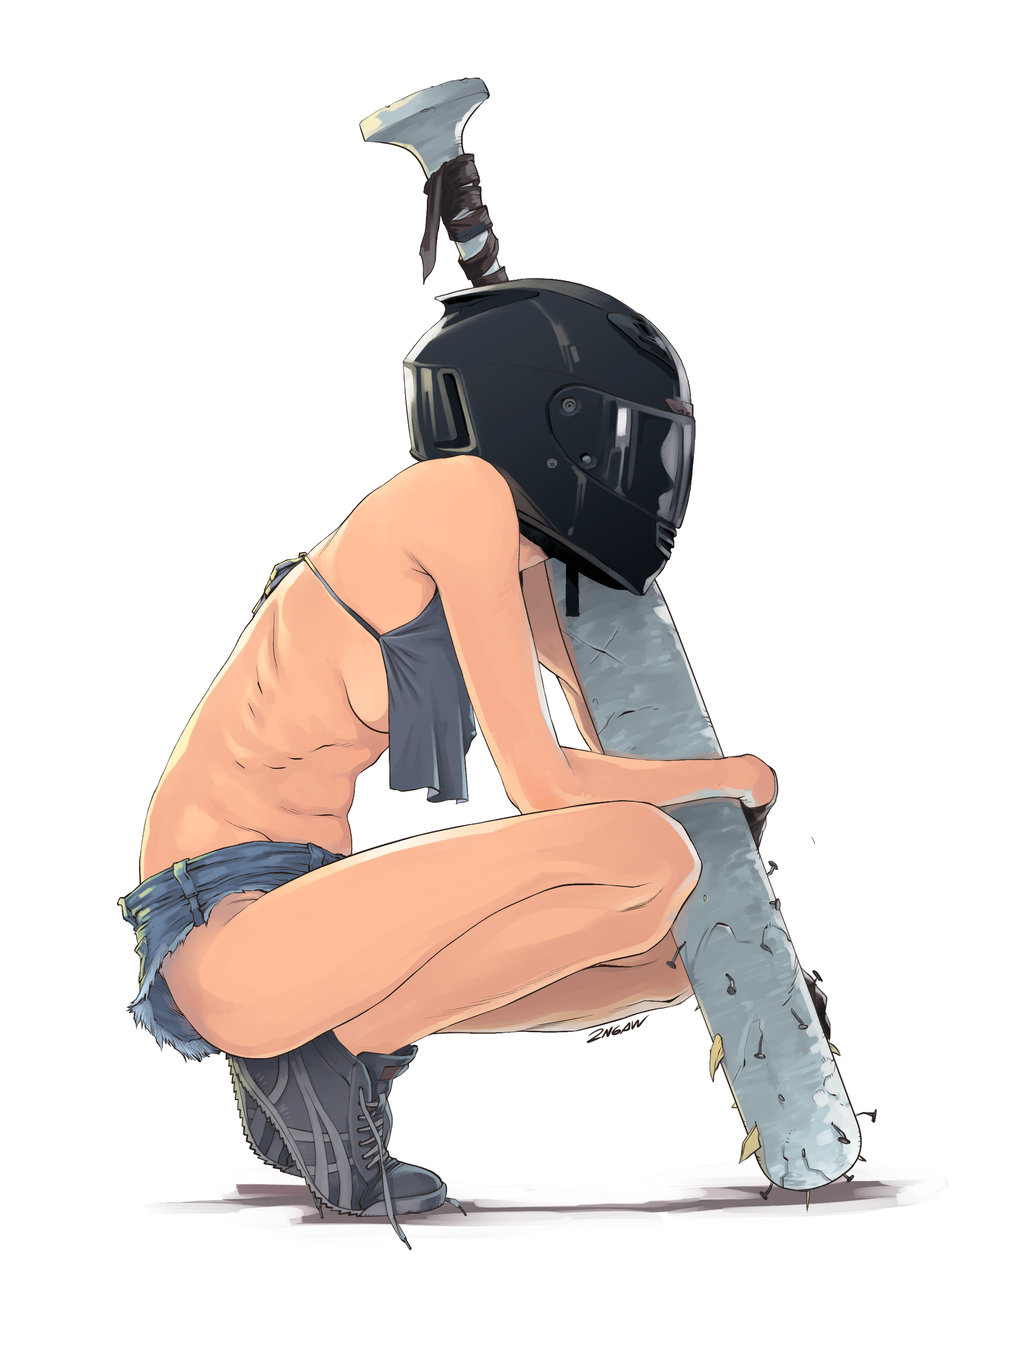 1girl 2ngaw bare_back baseball_bat crop_top crop_top_overhang gloves helmet highres motorcycle_helmet nail nail_bat shoes short_shorts shorts sneakers solo squatting untied_shoe weapon